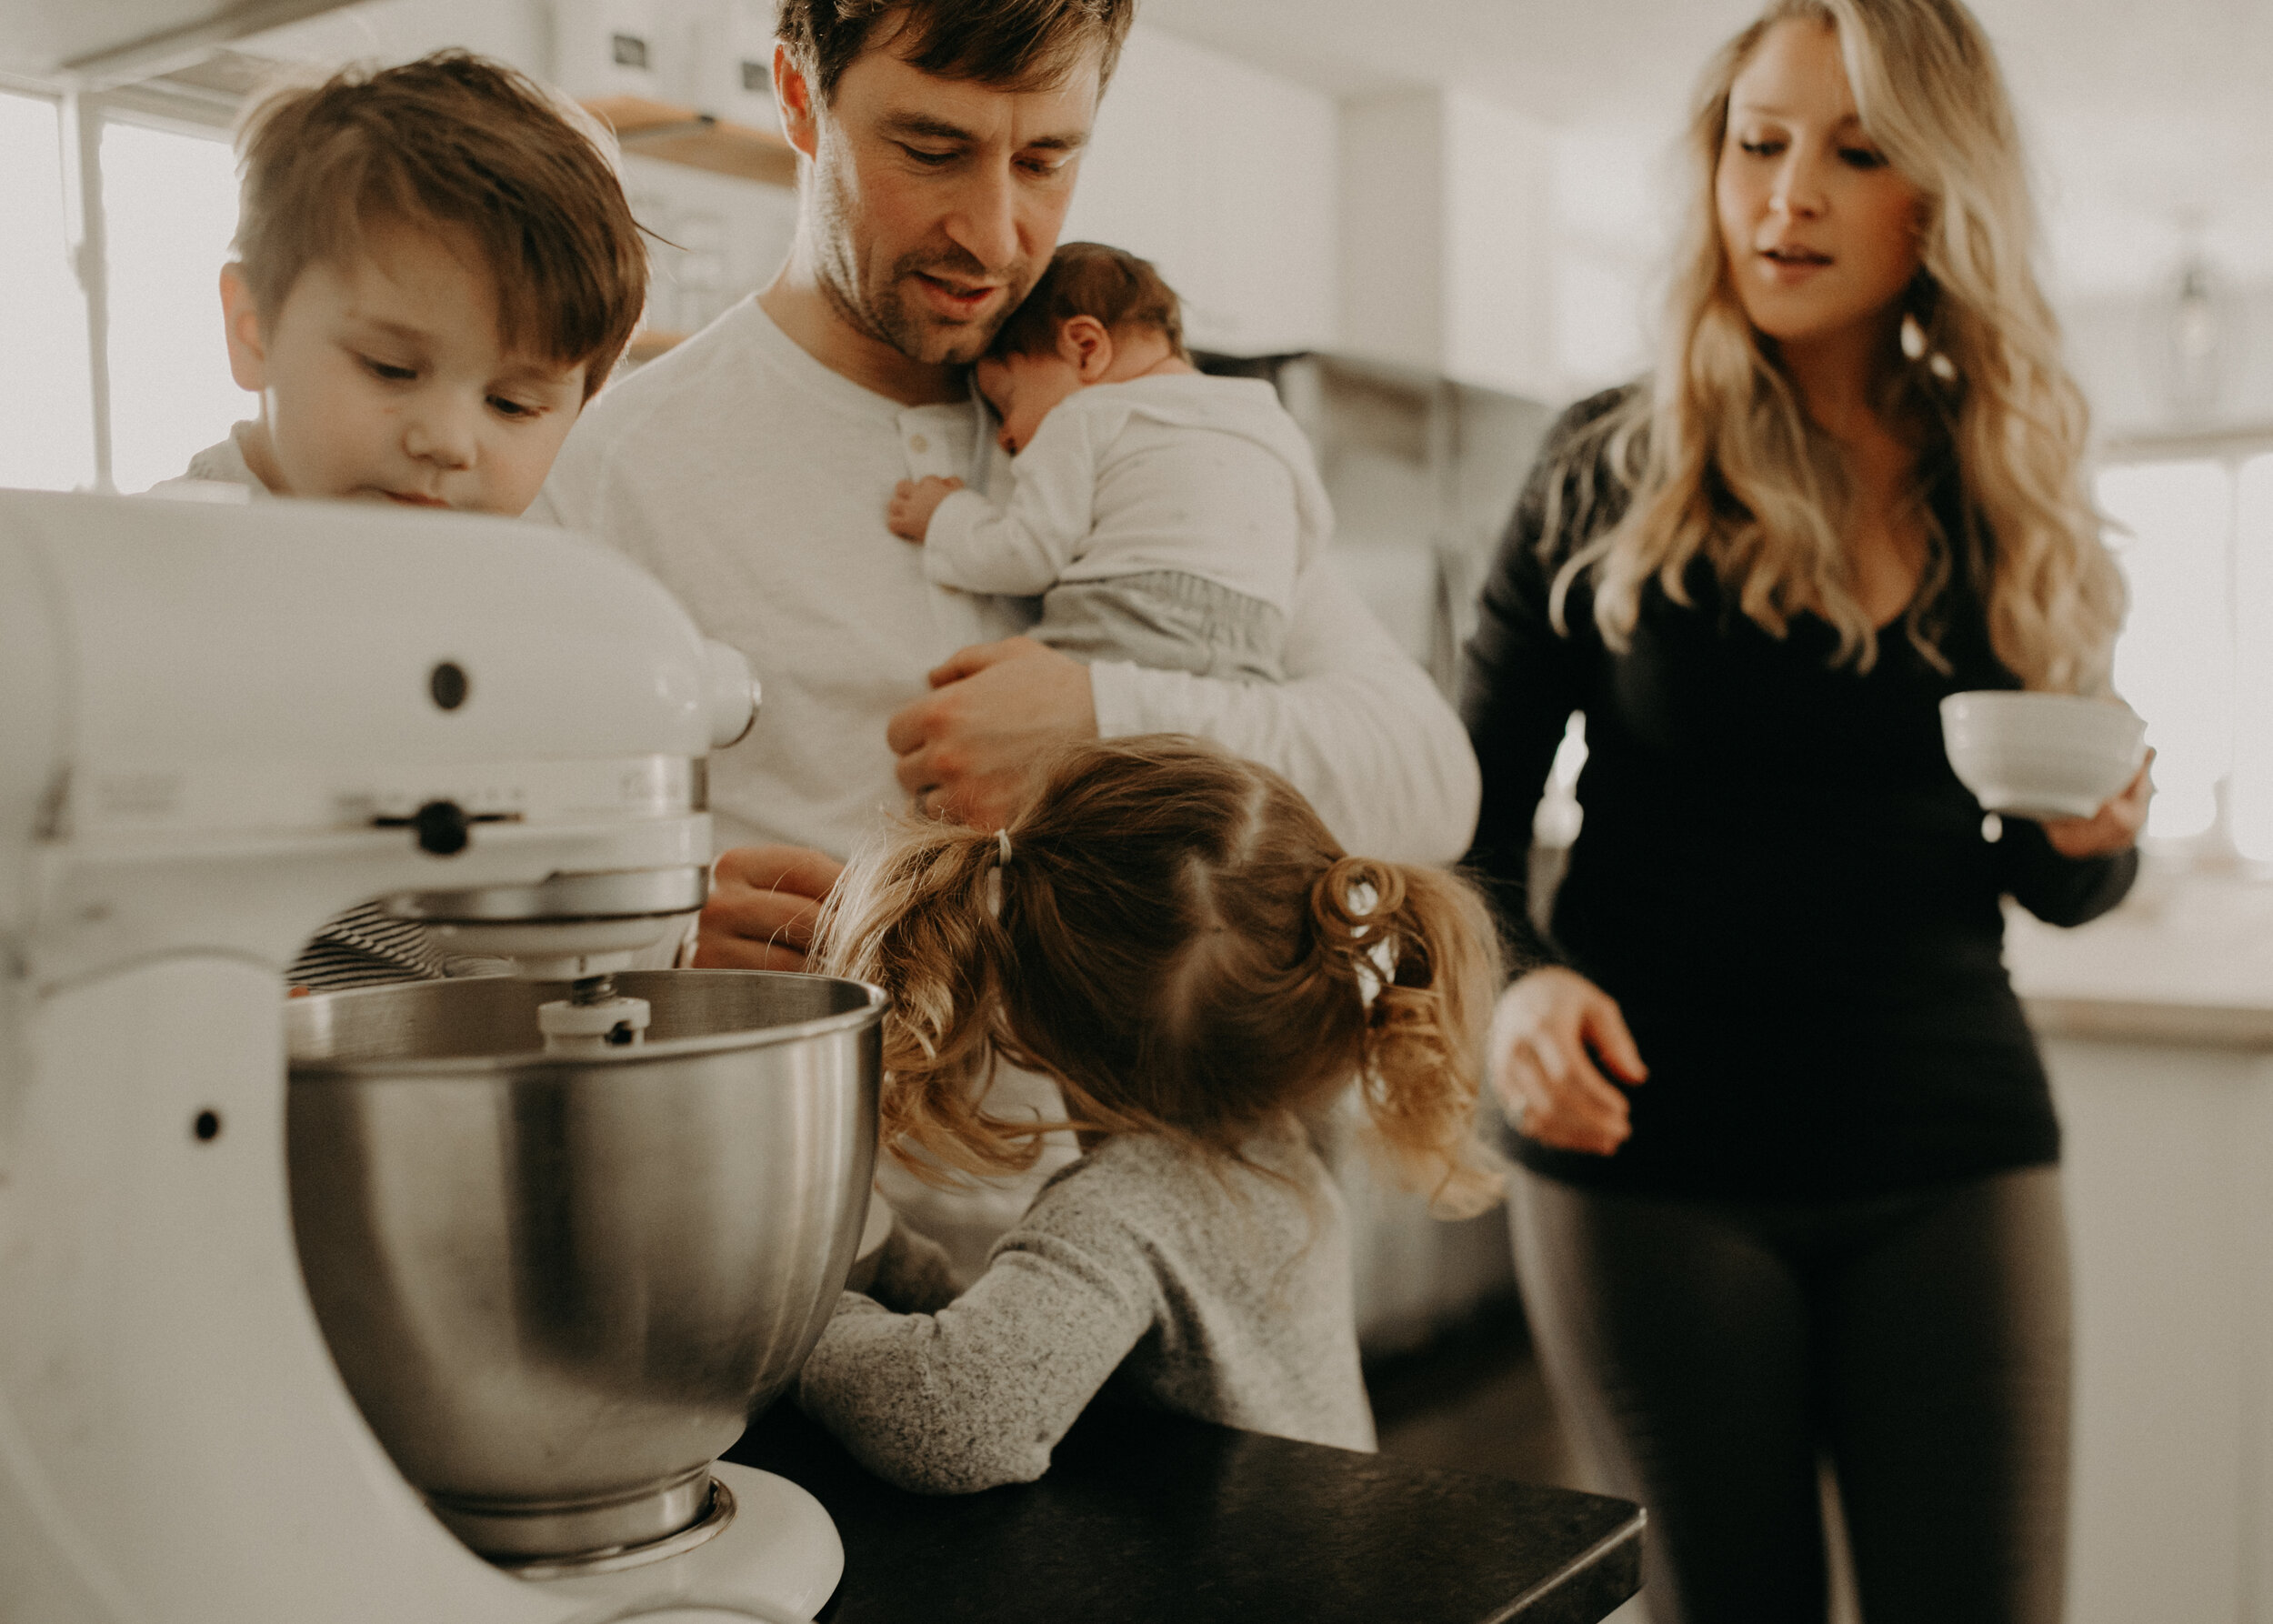  River Falls Family. River Falls Wisconsin. Mother cooking in the kitchen. Lifestyle Newborn Photo session. Wisconsin Newborn Photographer. Wisconsin Lifestyle Newborn Photographer. Lifestyle Newborn In Home Session. Beautiful mom in white making cho